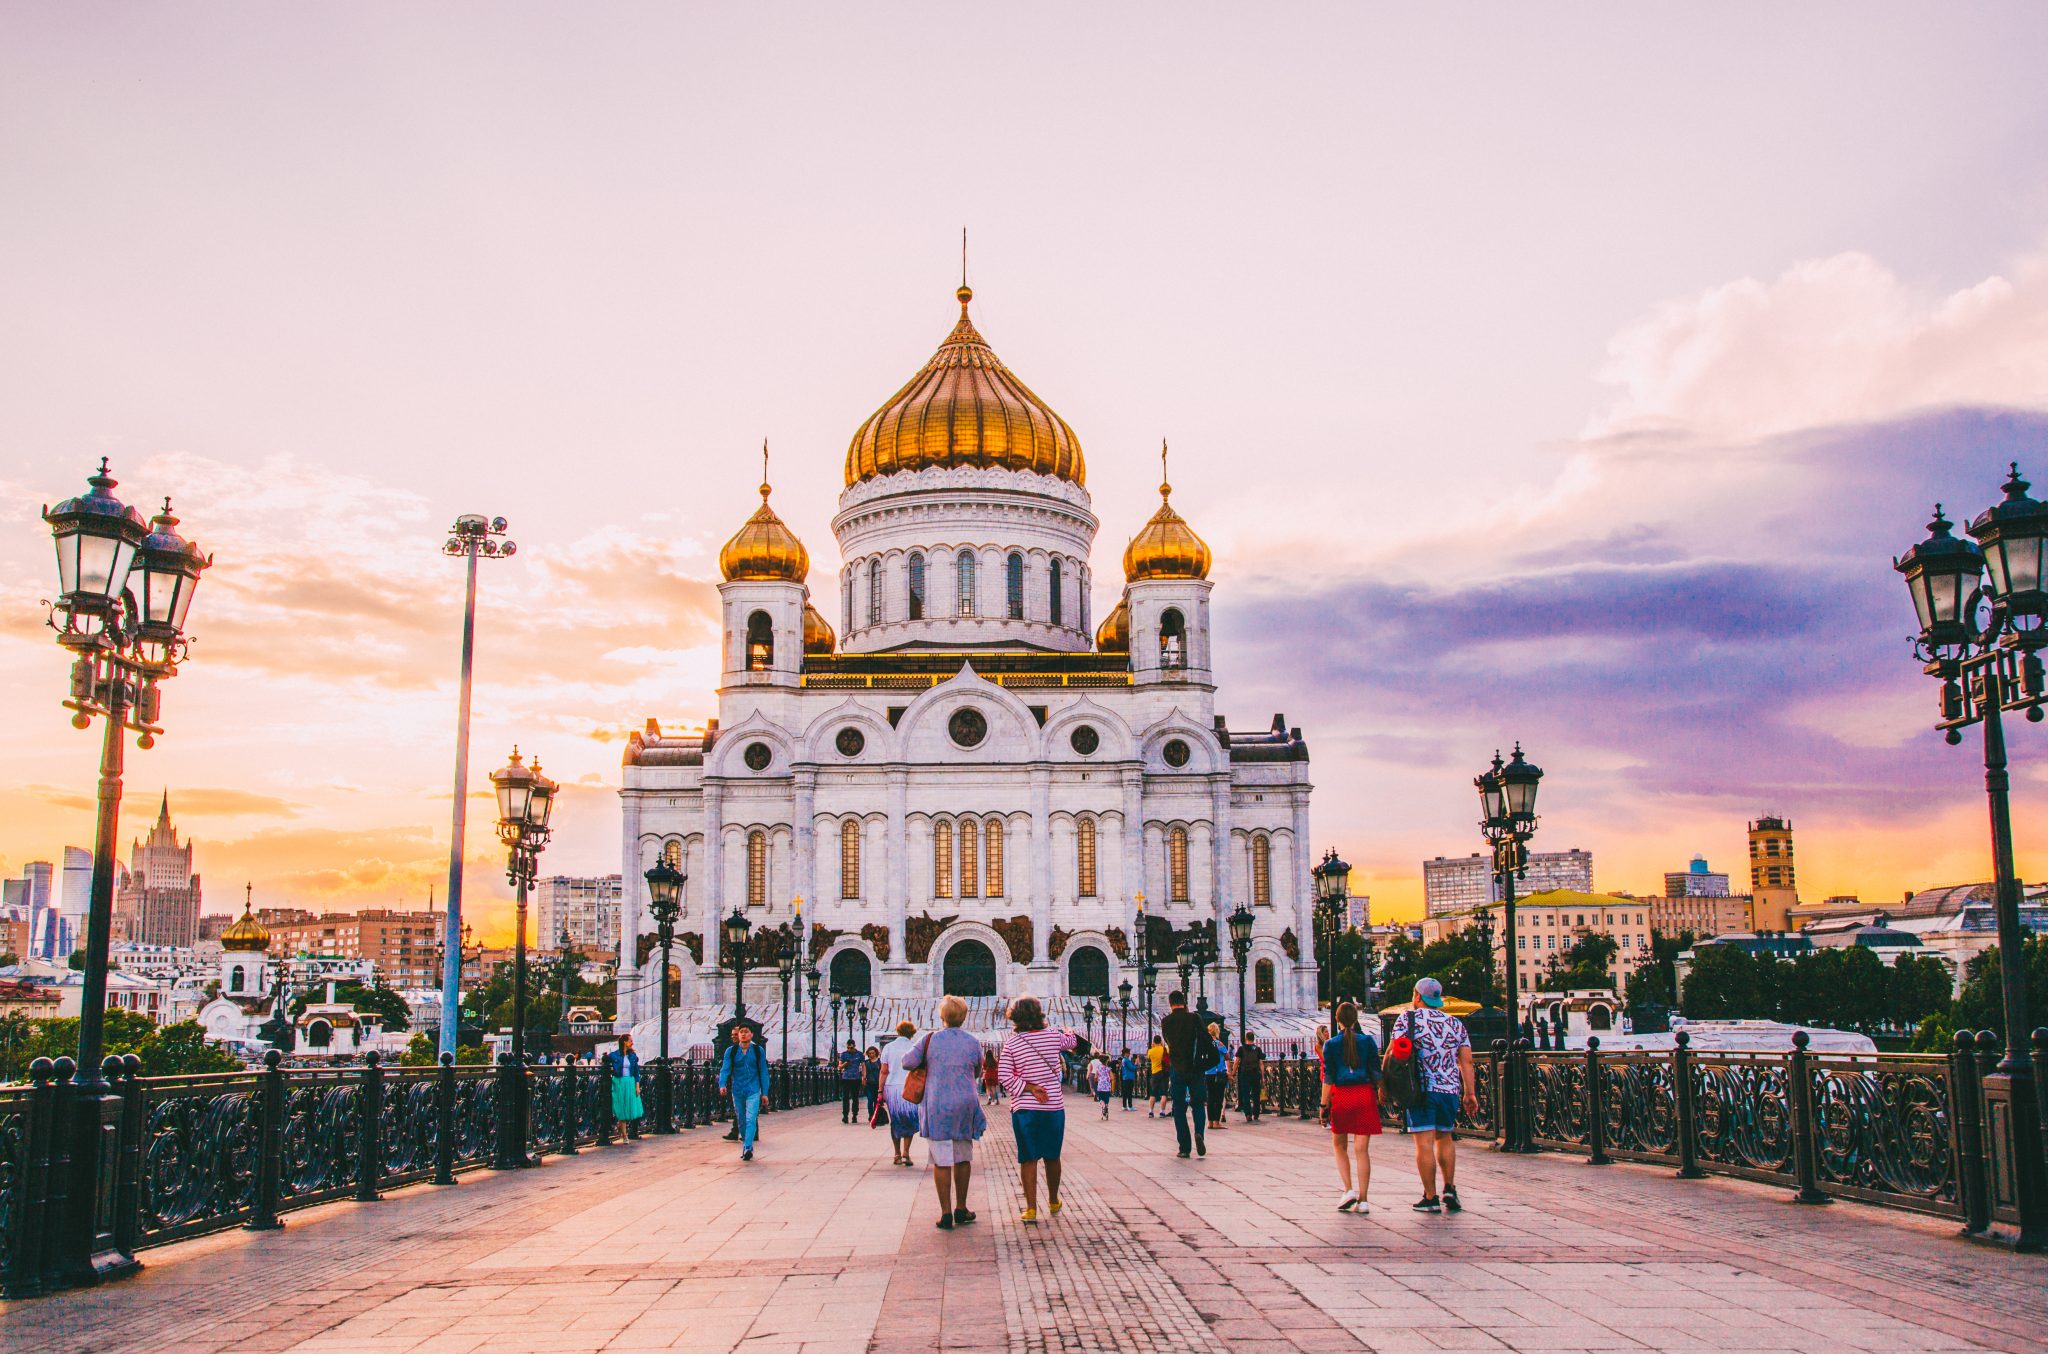 30+ Best Things to Do in Moscow, Russia by a Resident of Moscow